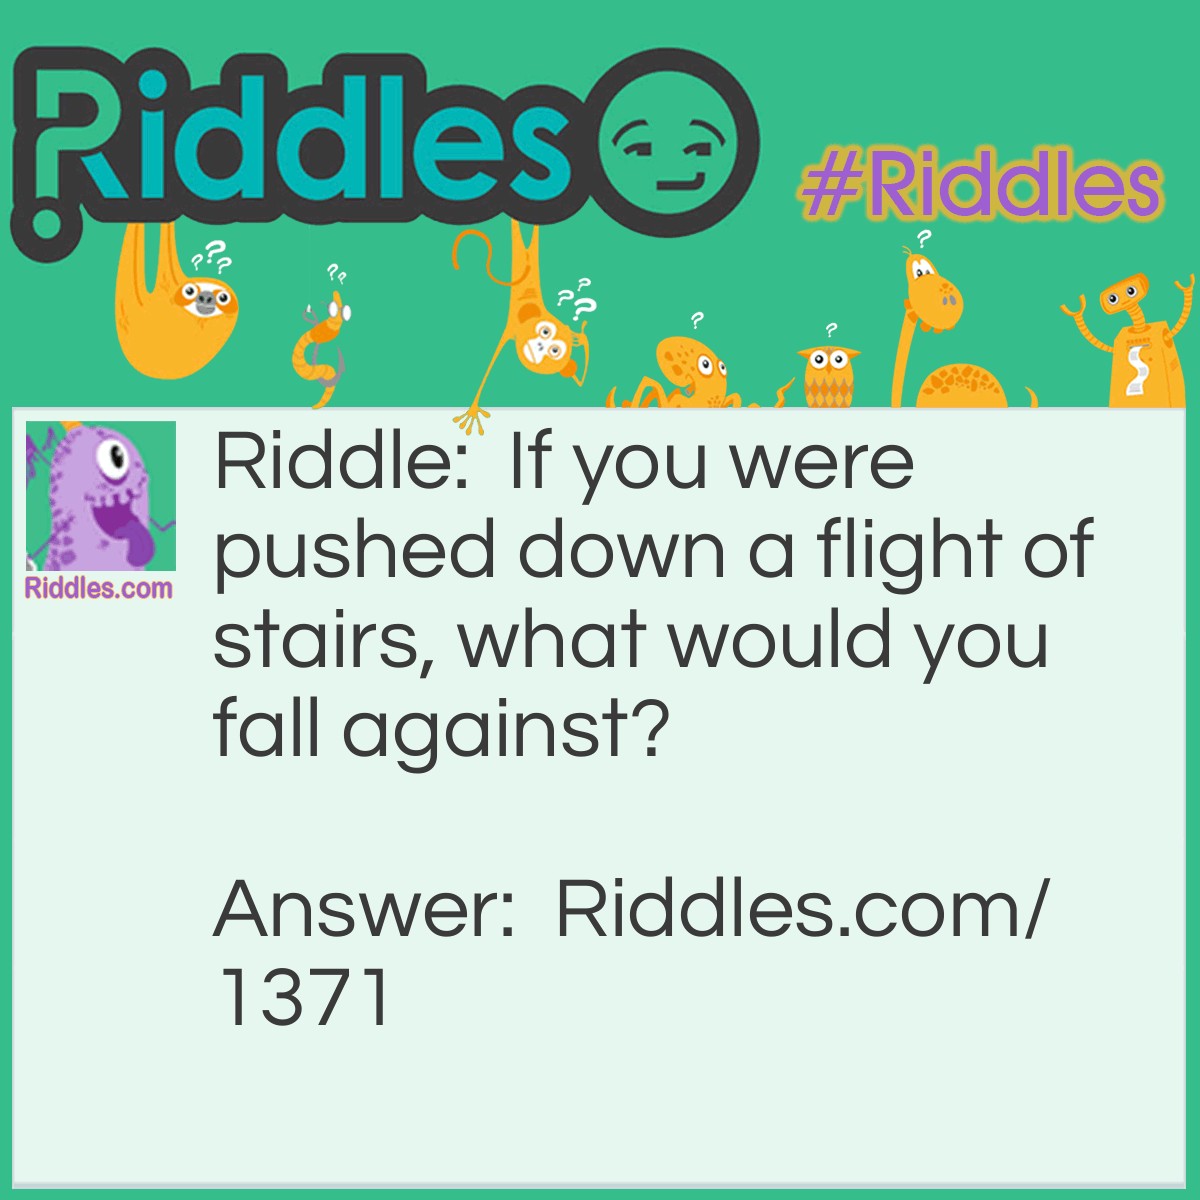 Riddle: If you were pushed down a flight of stairs, what would you fall against? Answer: Your will.